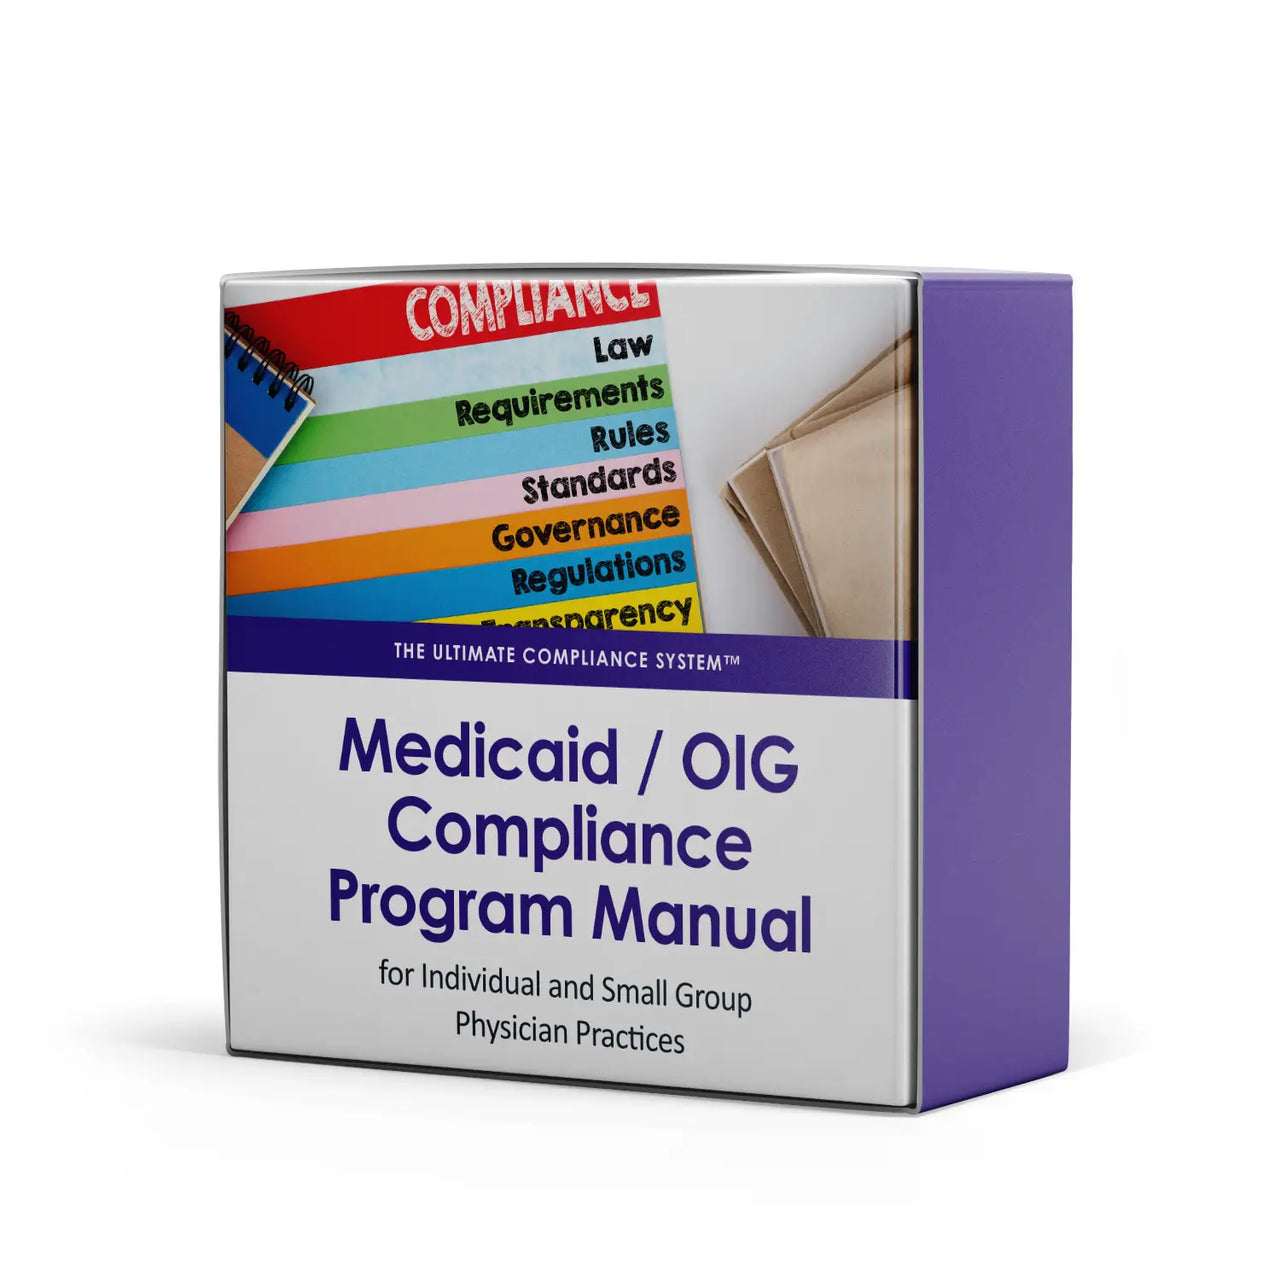 Medicaid/ OIG Compliance Program Manual for Individual and Small Group Physician Practices